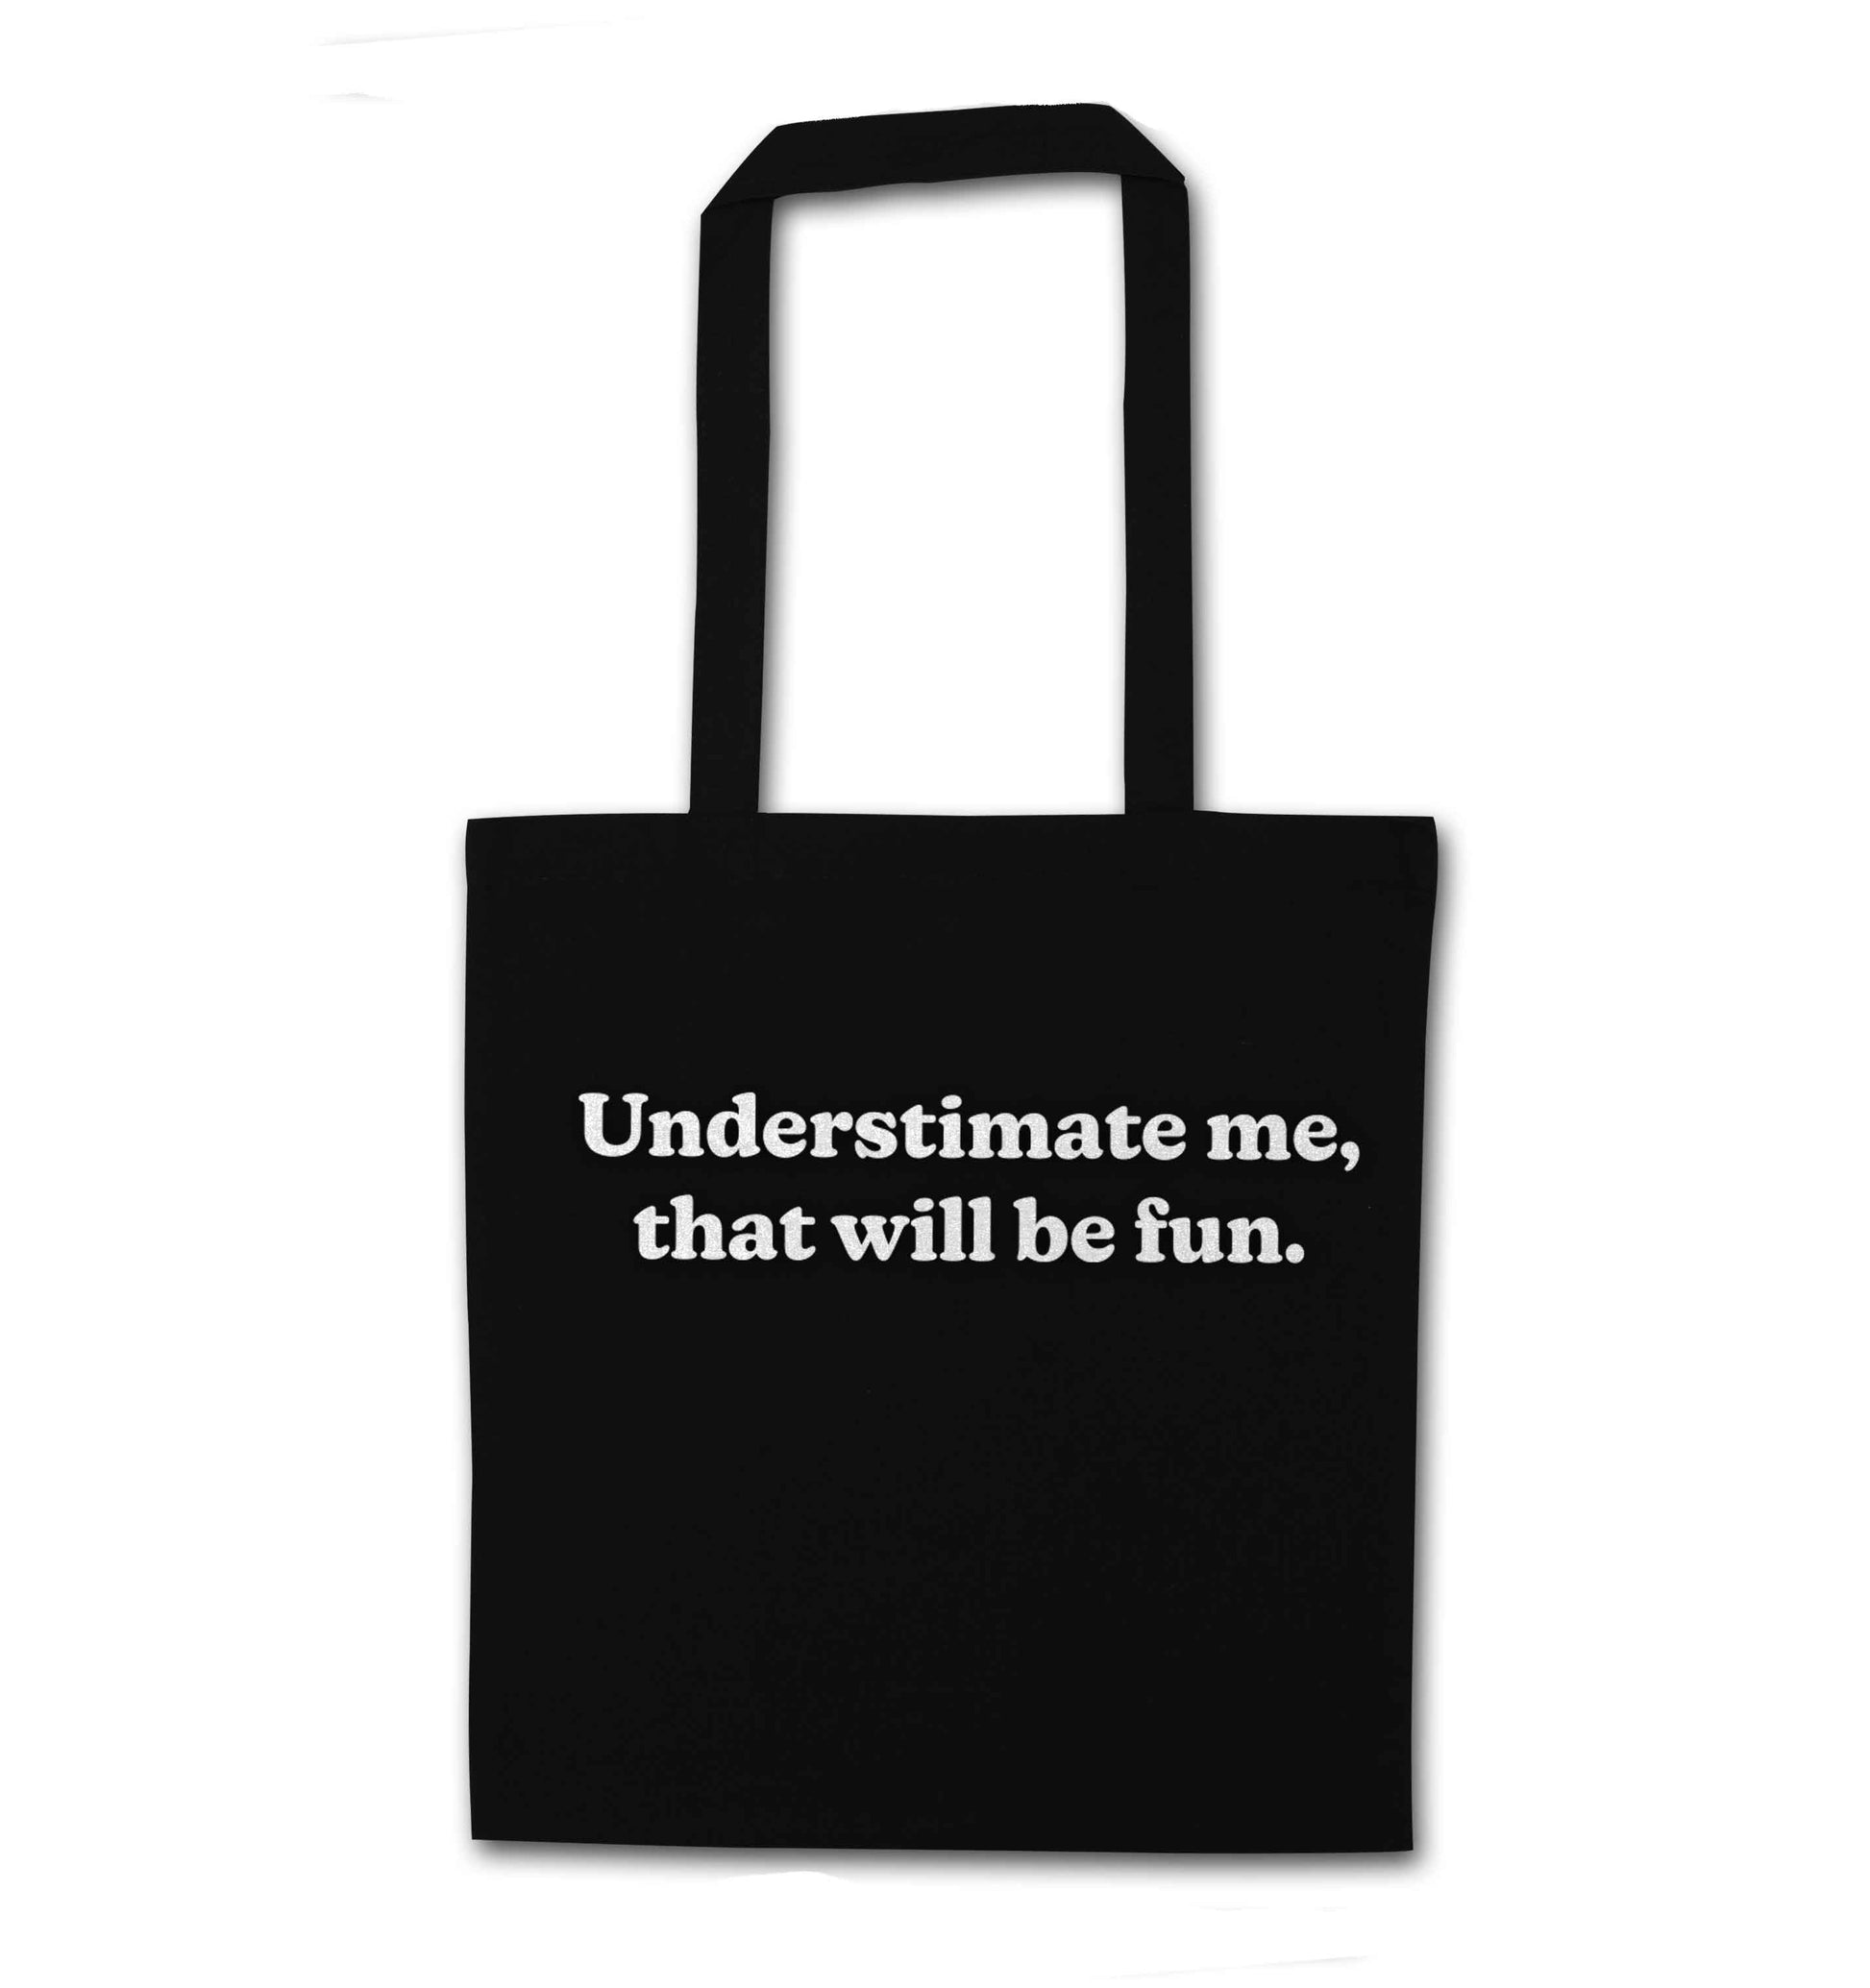 Underestimate me that will be fun black tote bag